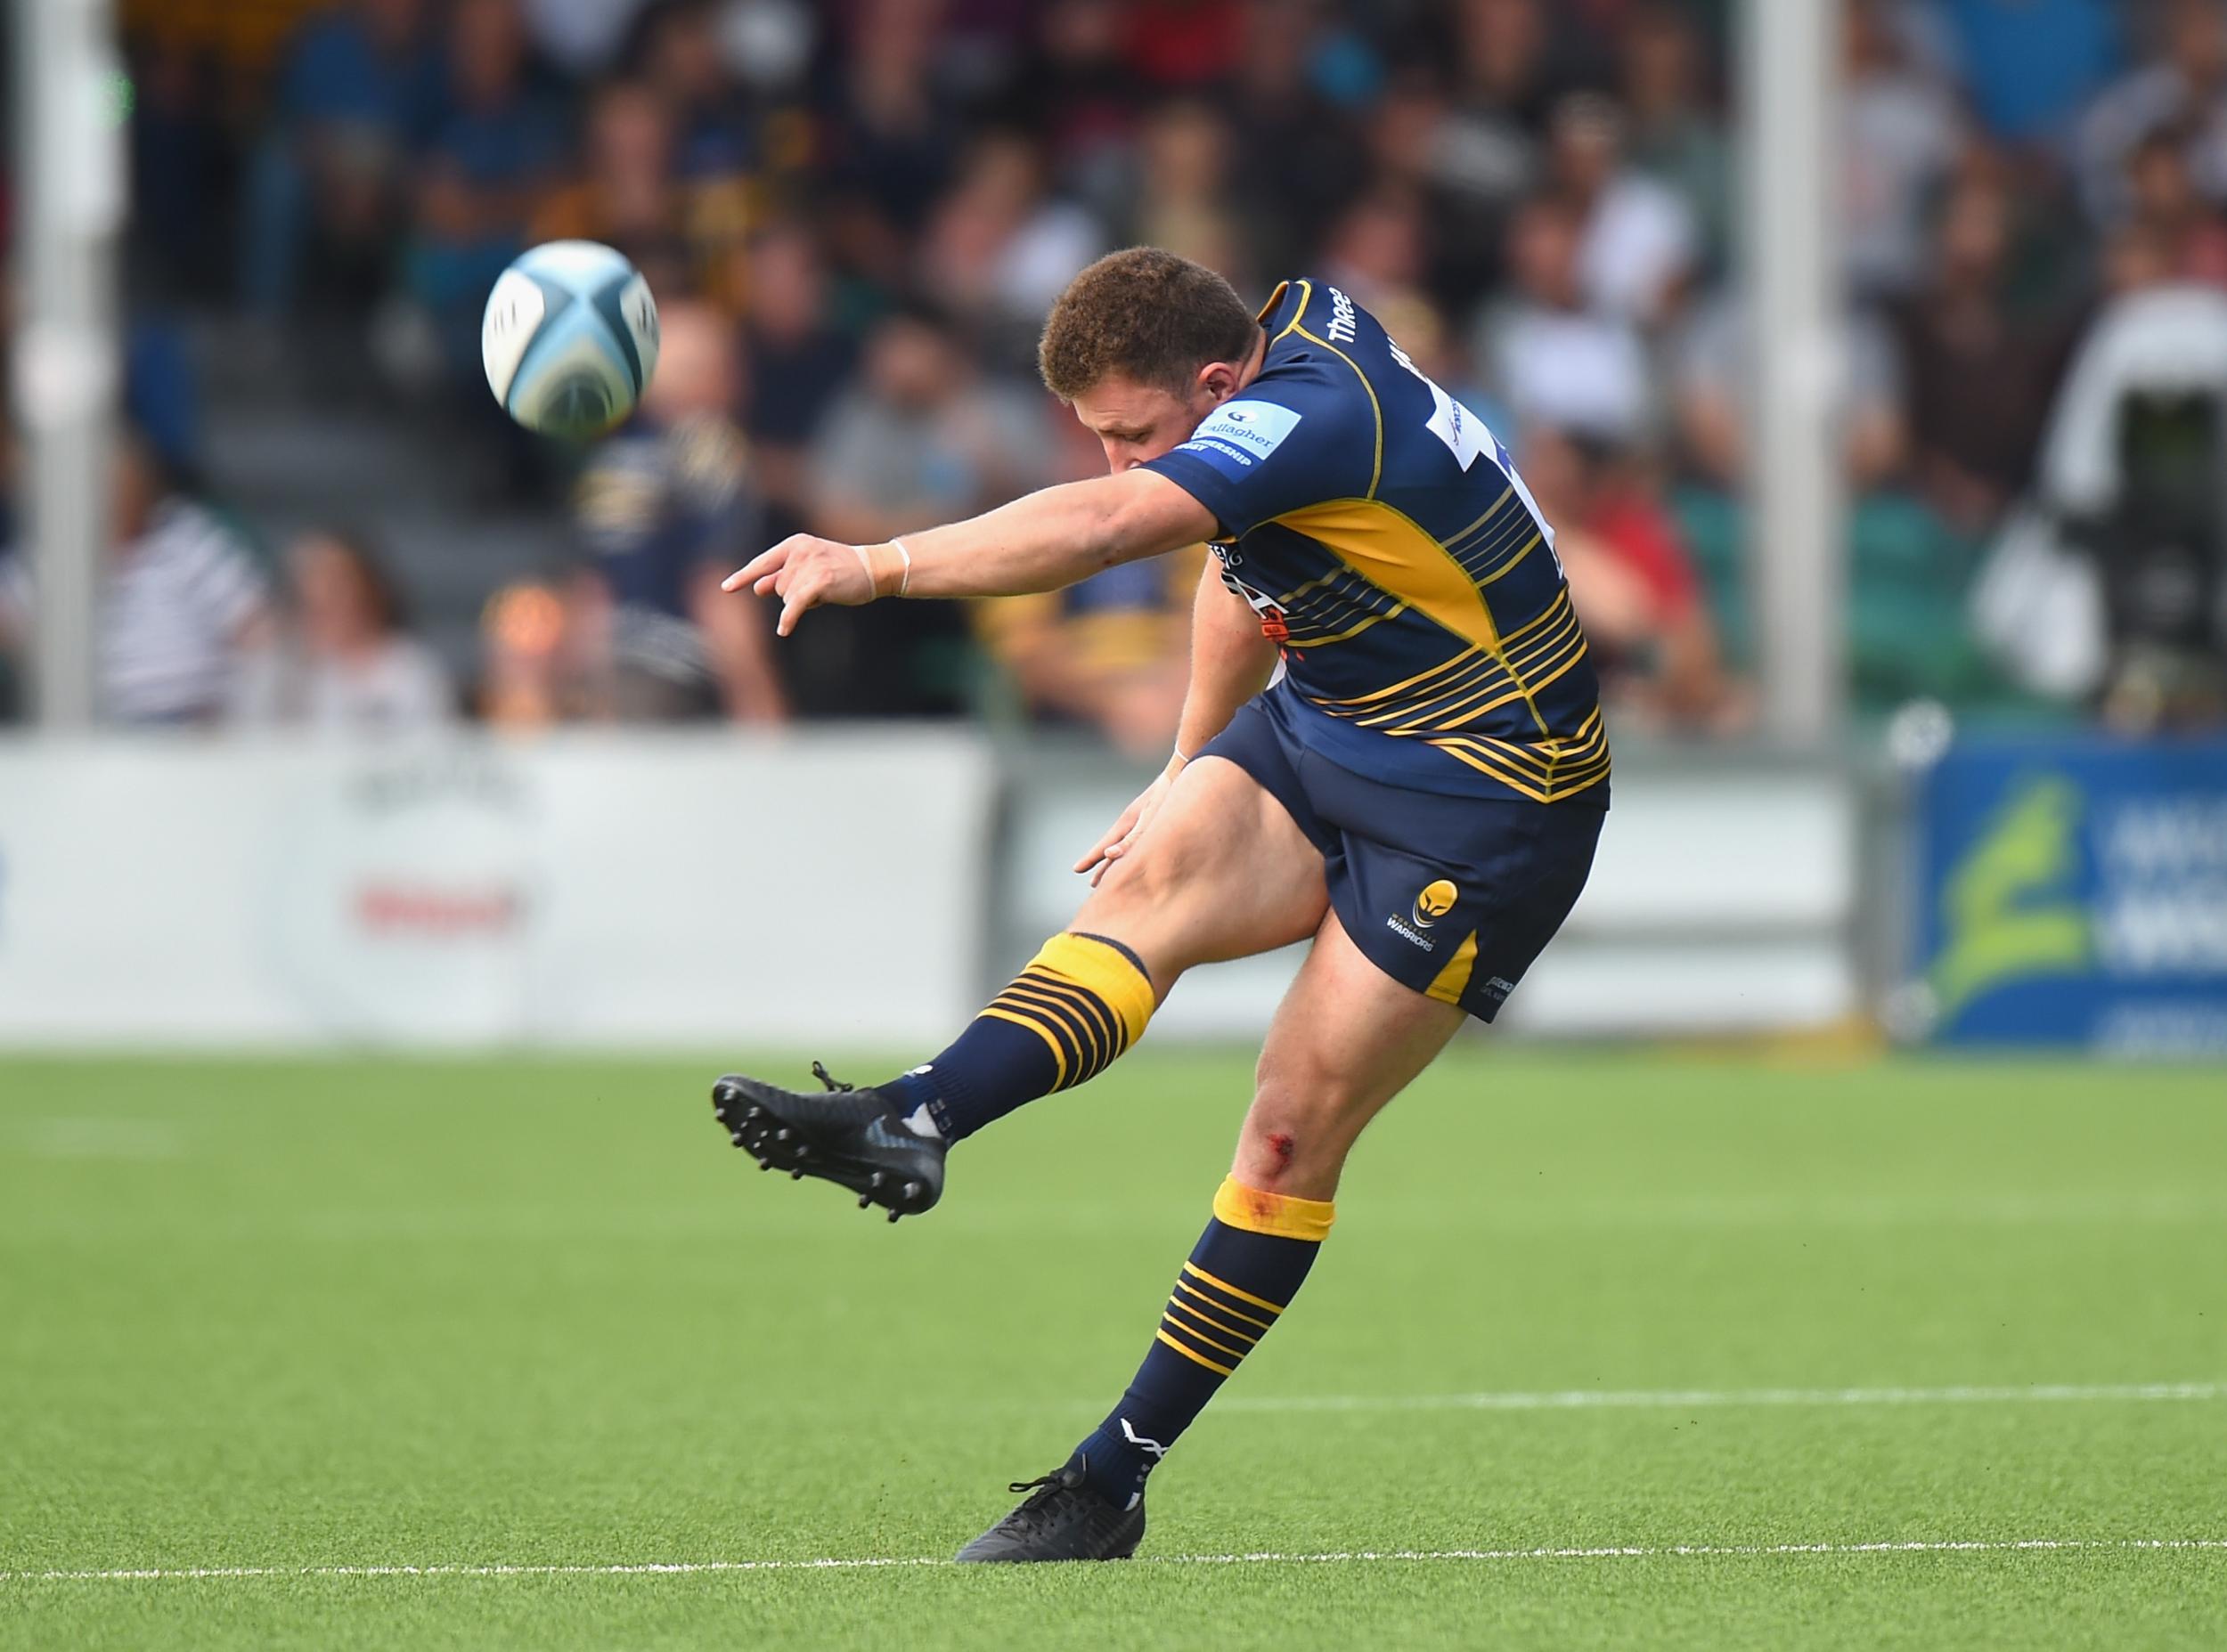 Duncan Weir missed a drop-goal attempt at the death to cost Worcester victory